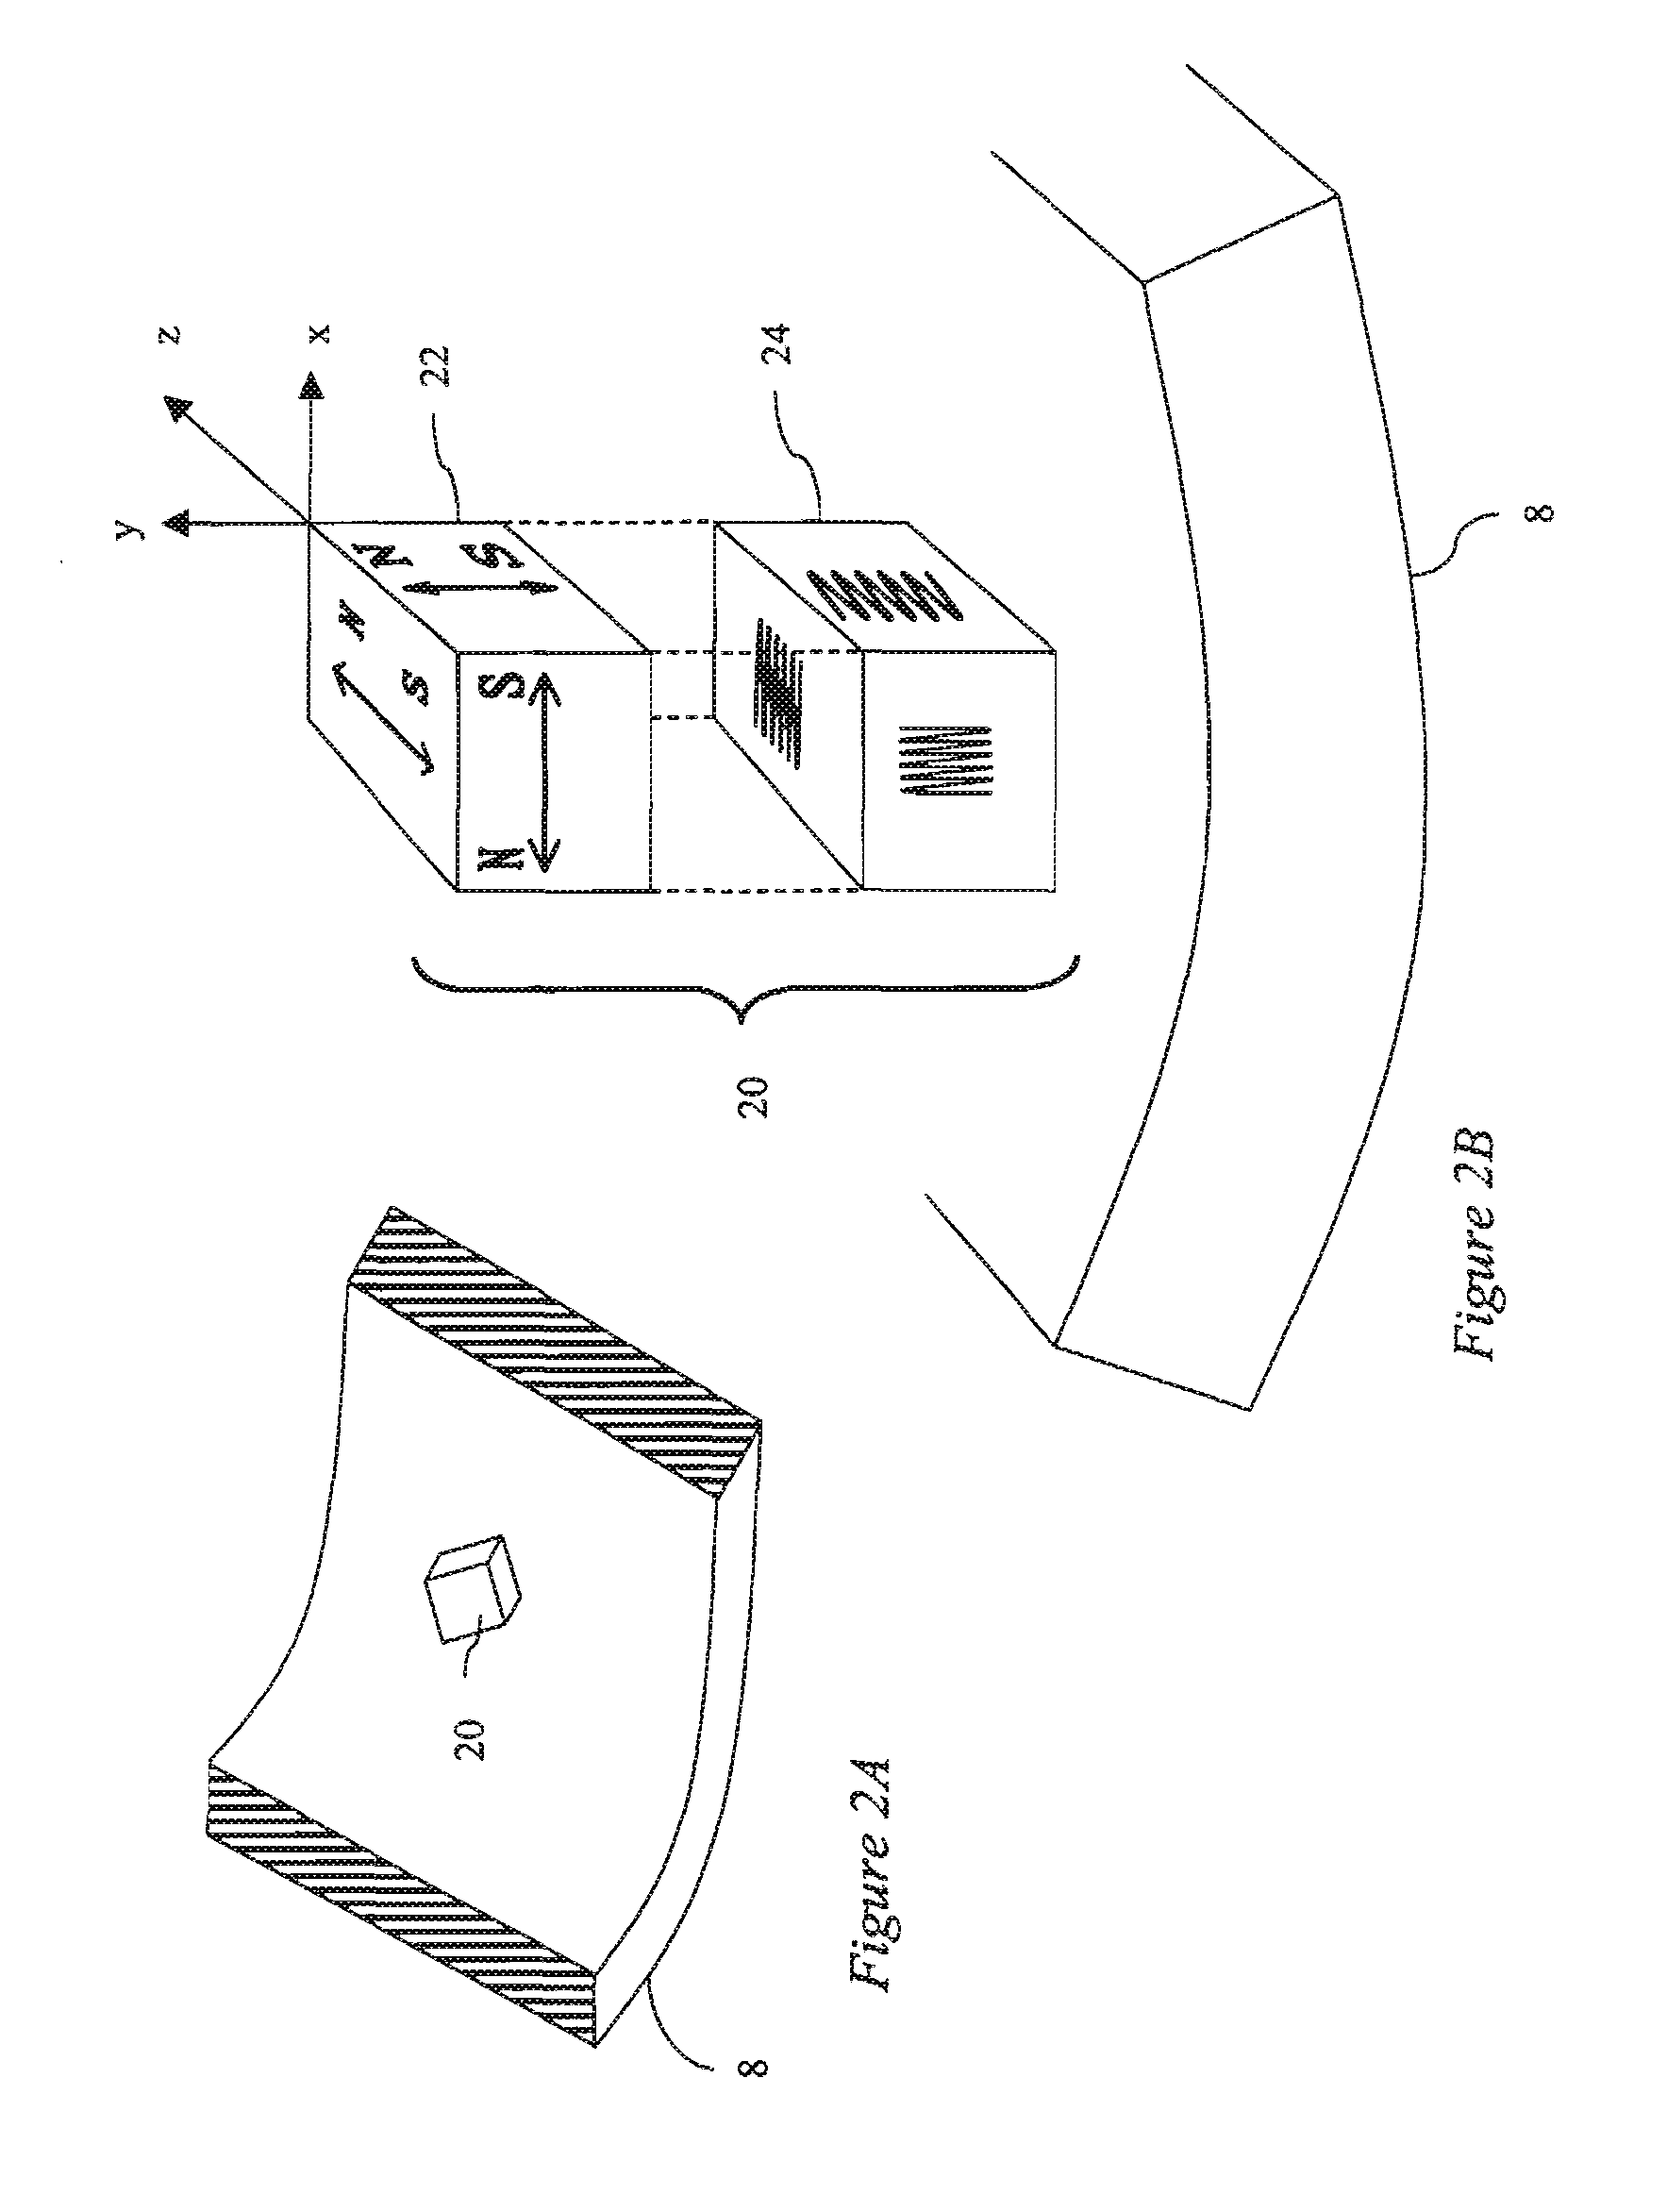 Method and apparatus for generation of acoustic shear waves through casing using physical coupling of vibrating magnets